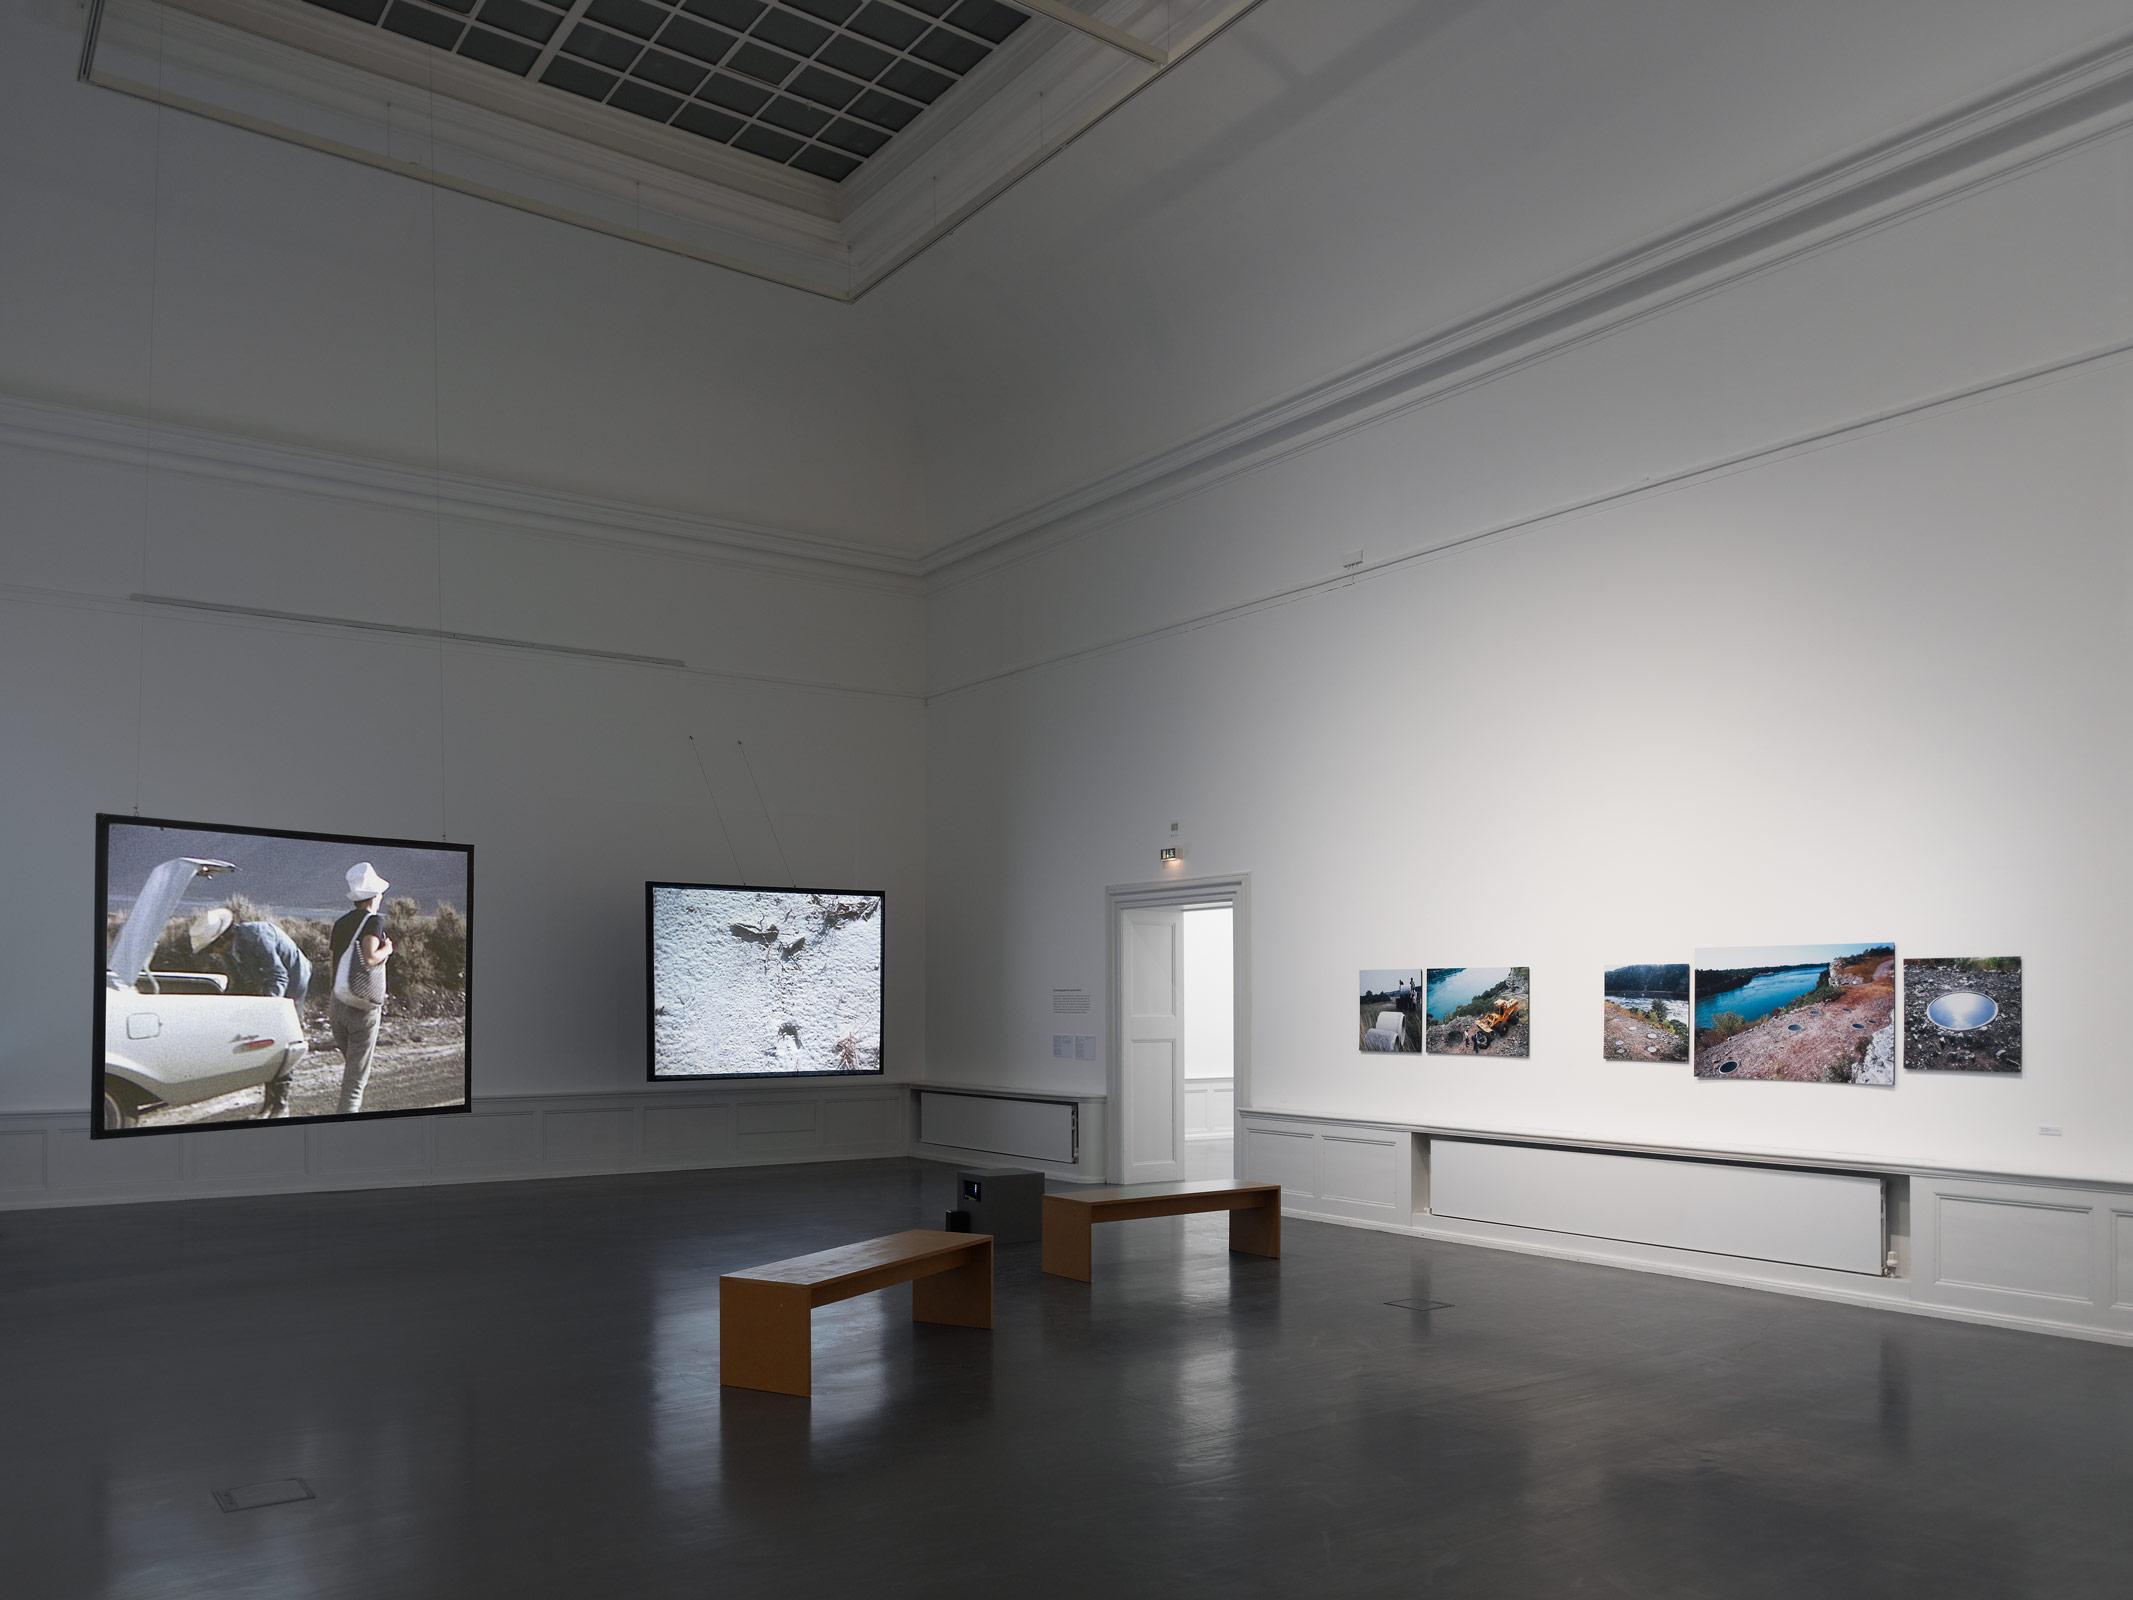 A large white walled room with benches and projected images on two hanging screens and images on the wall.